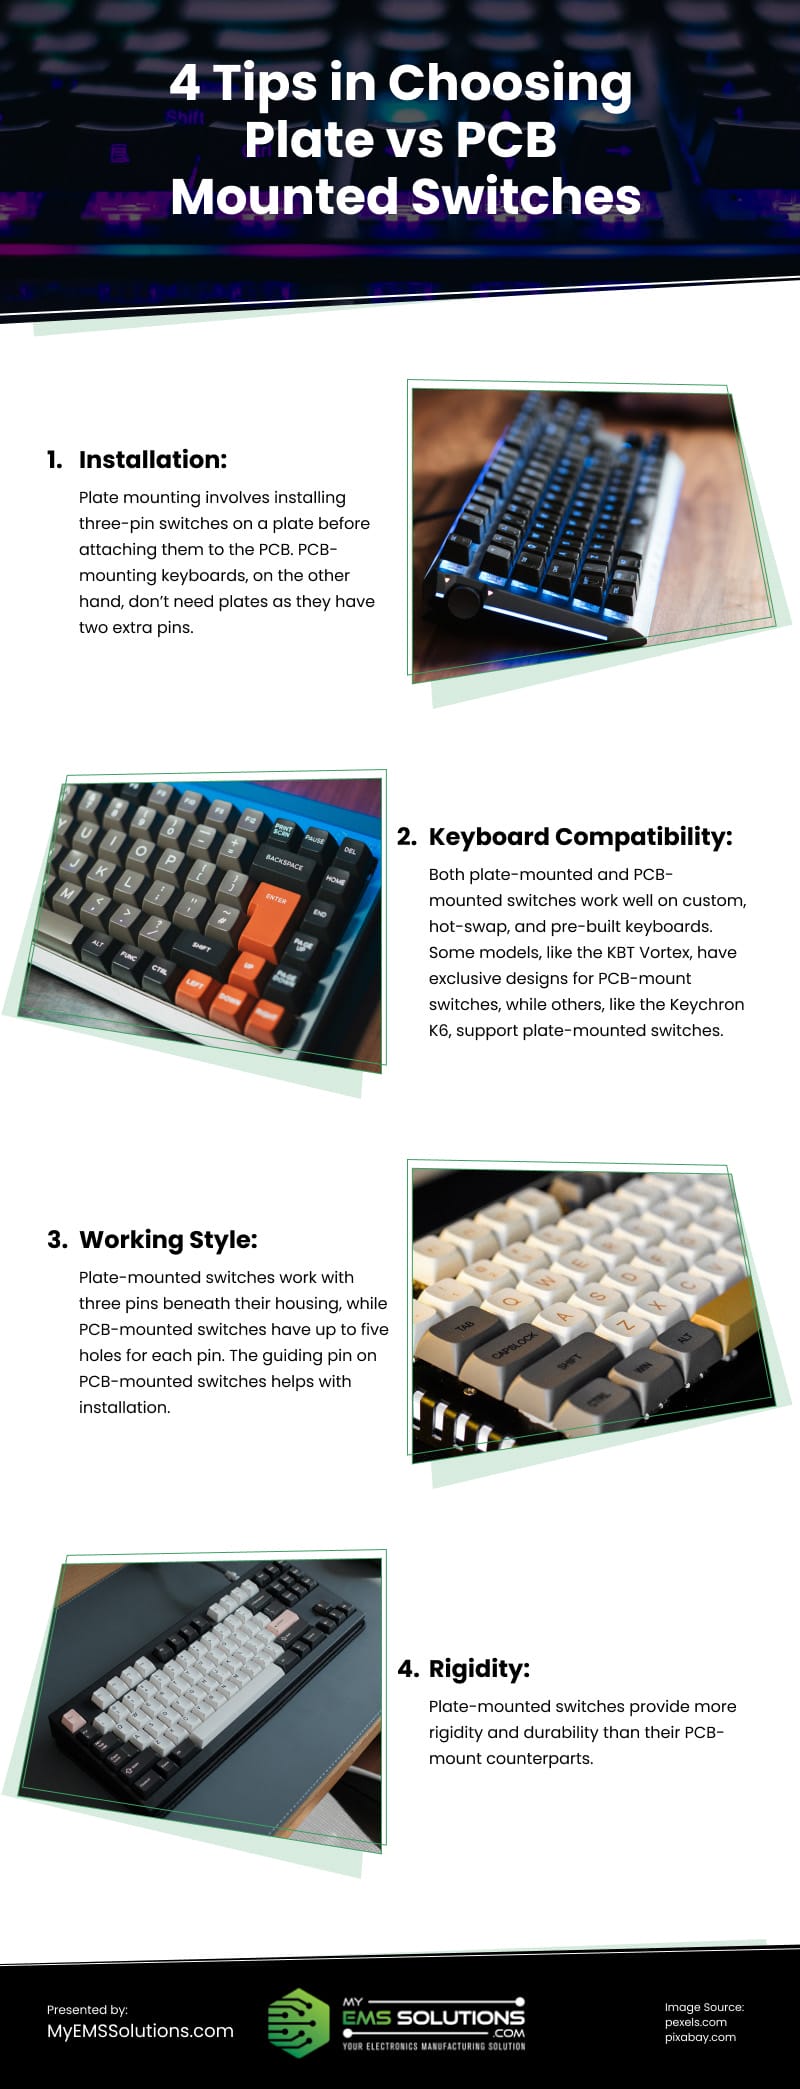 4 Tips in Choosing Plate vs PCB Mounted Switches Infographic